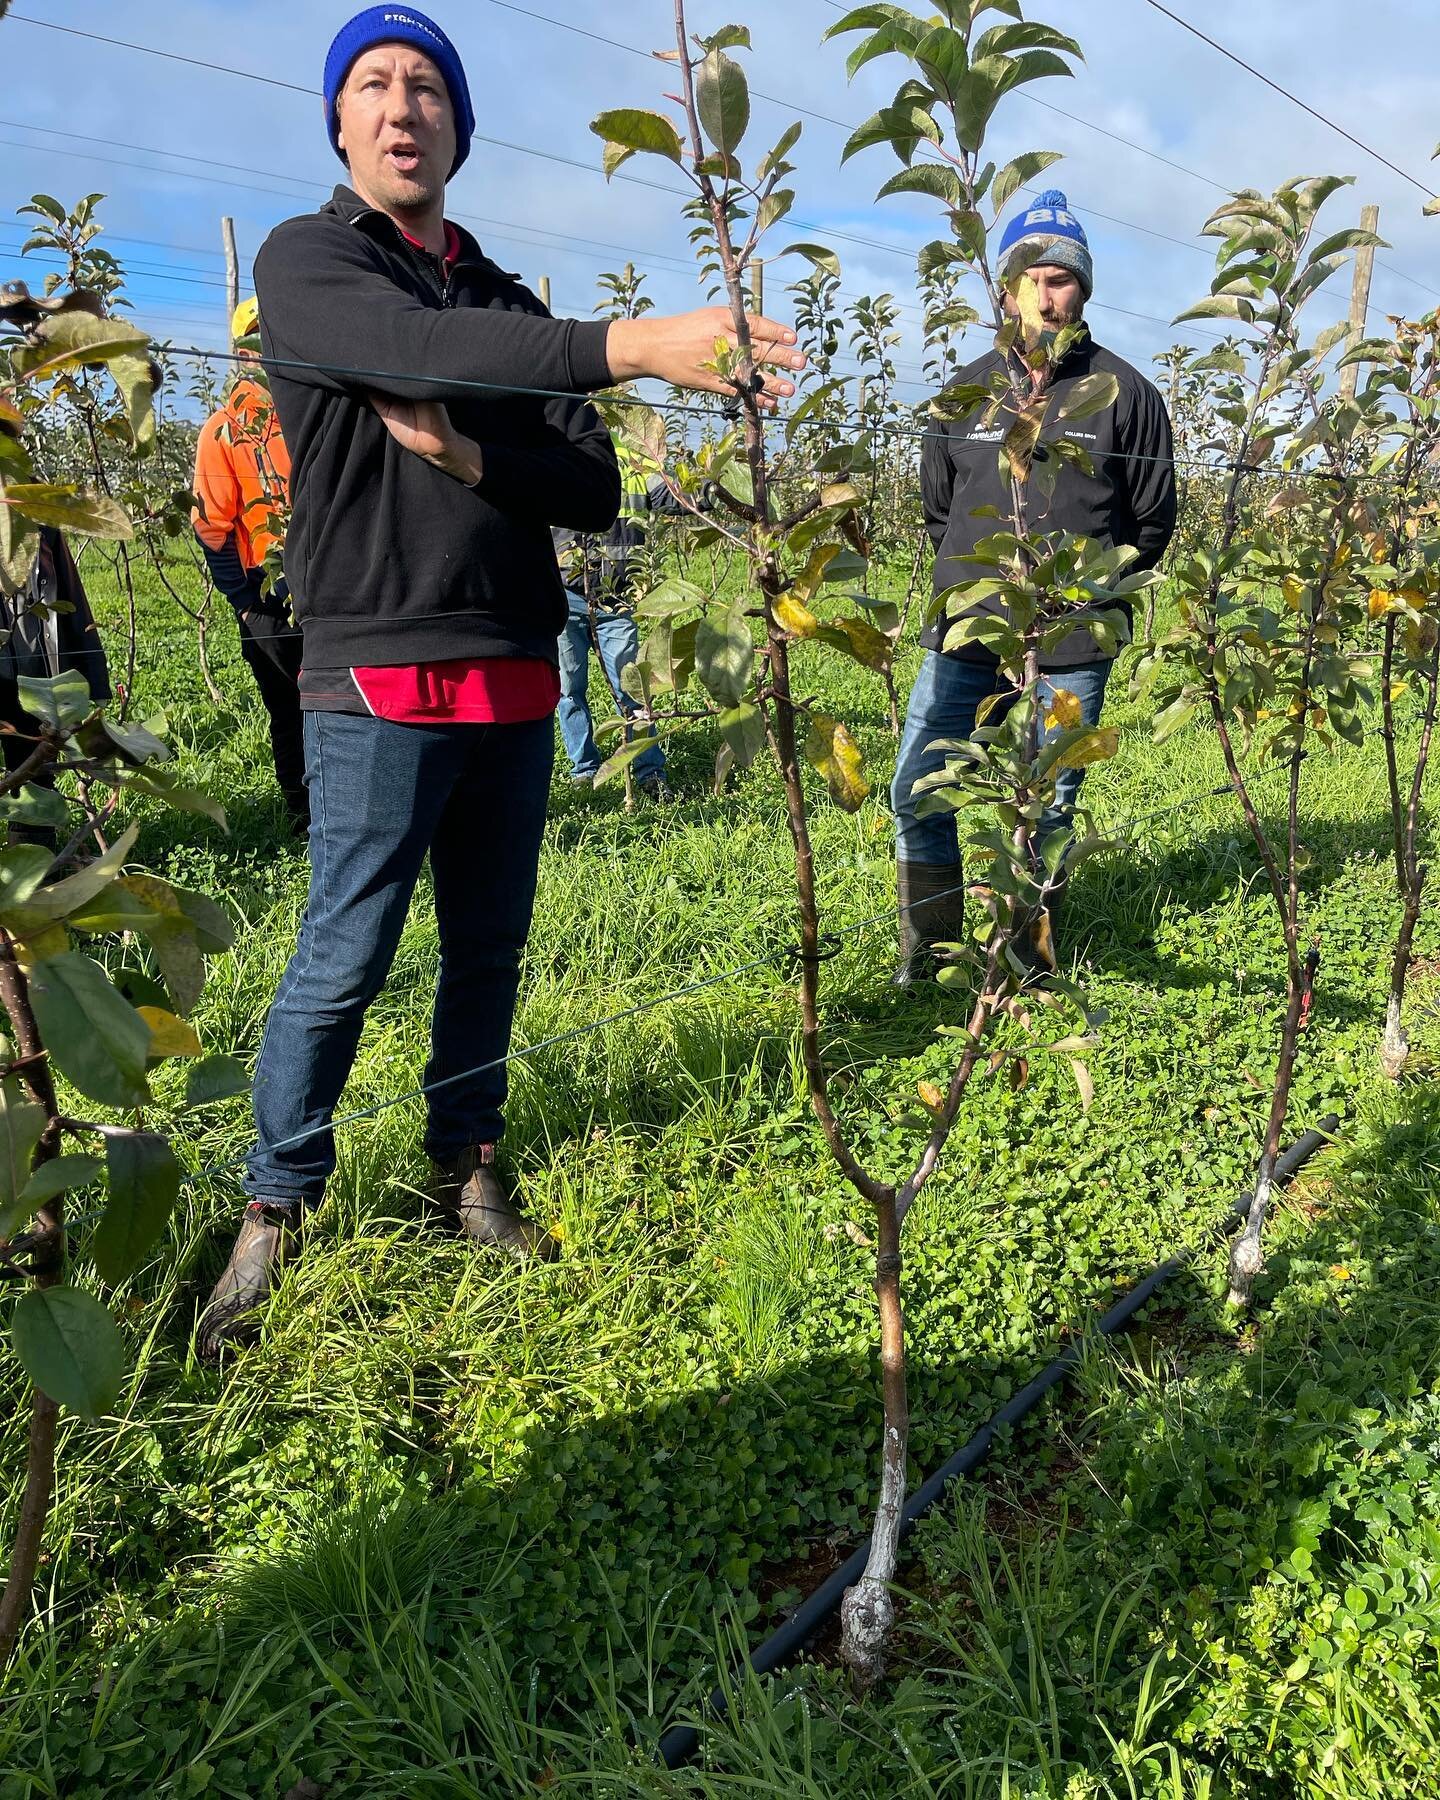 Awesome Day at the APAL WA Winter Future Orchard Walk at Collins Bros Orchards in Pemberton yesterday - Congratulations to Susie and sincere thanks to Murray and Dean  Collins for hosting this great event 🍎🍐🍏